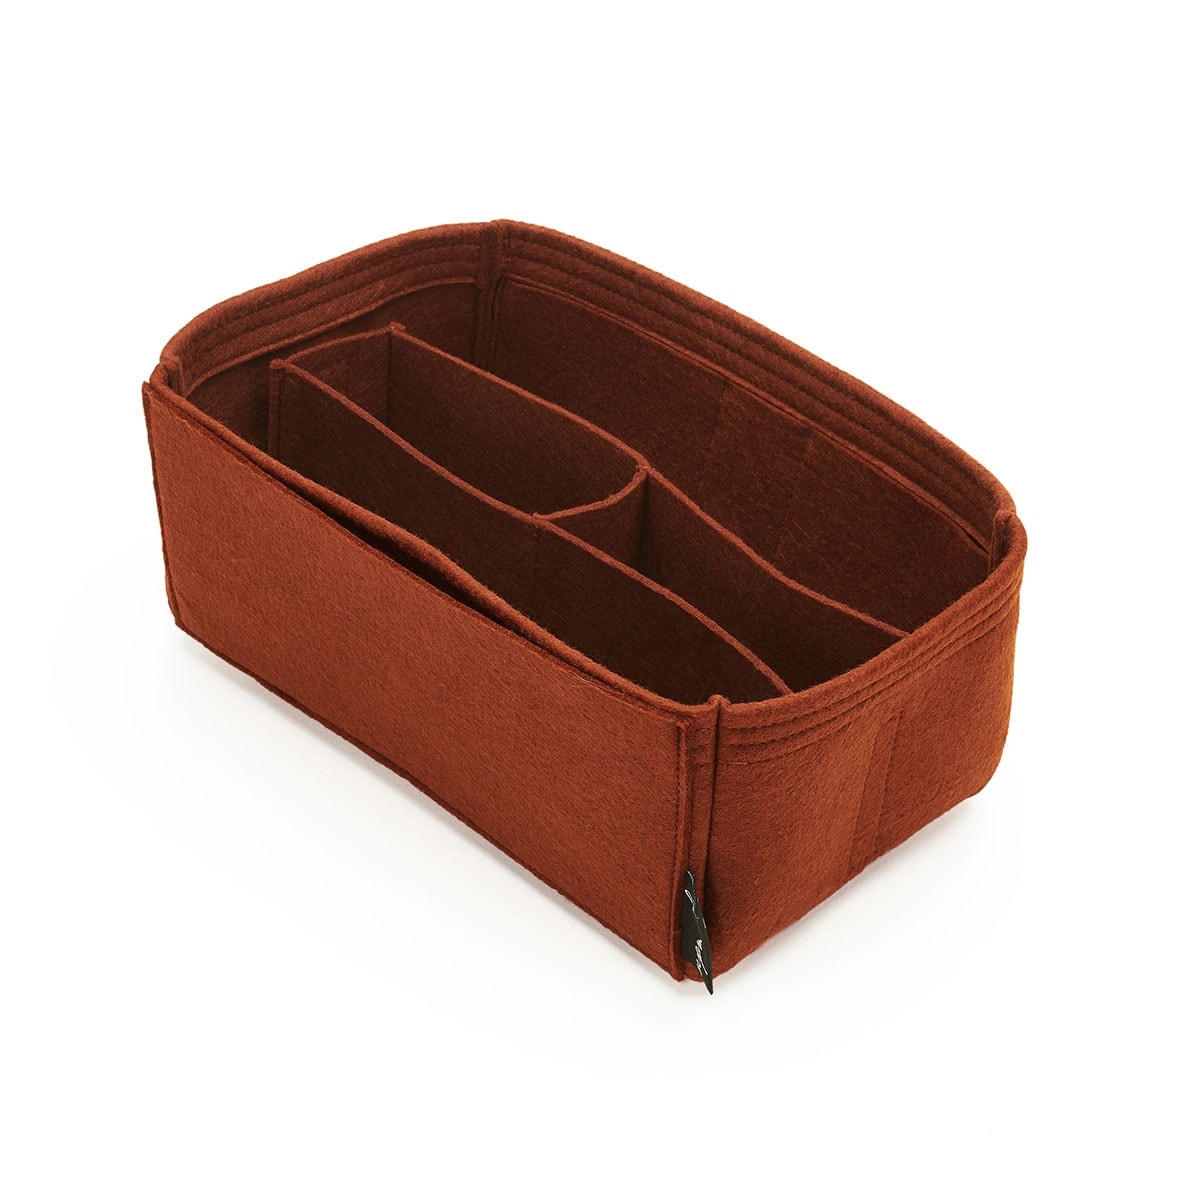 Louis Vuitton Delightful Organizer Insert, Bag Organizer with Middle  Compartment and Pen Holder